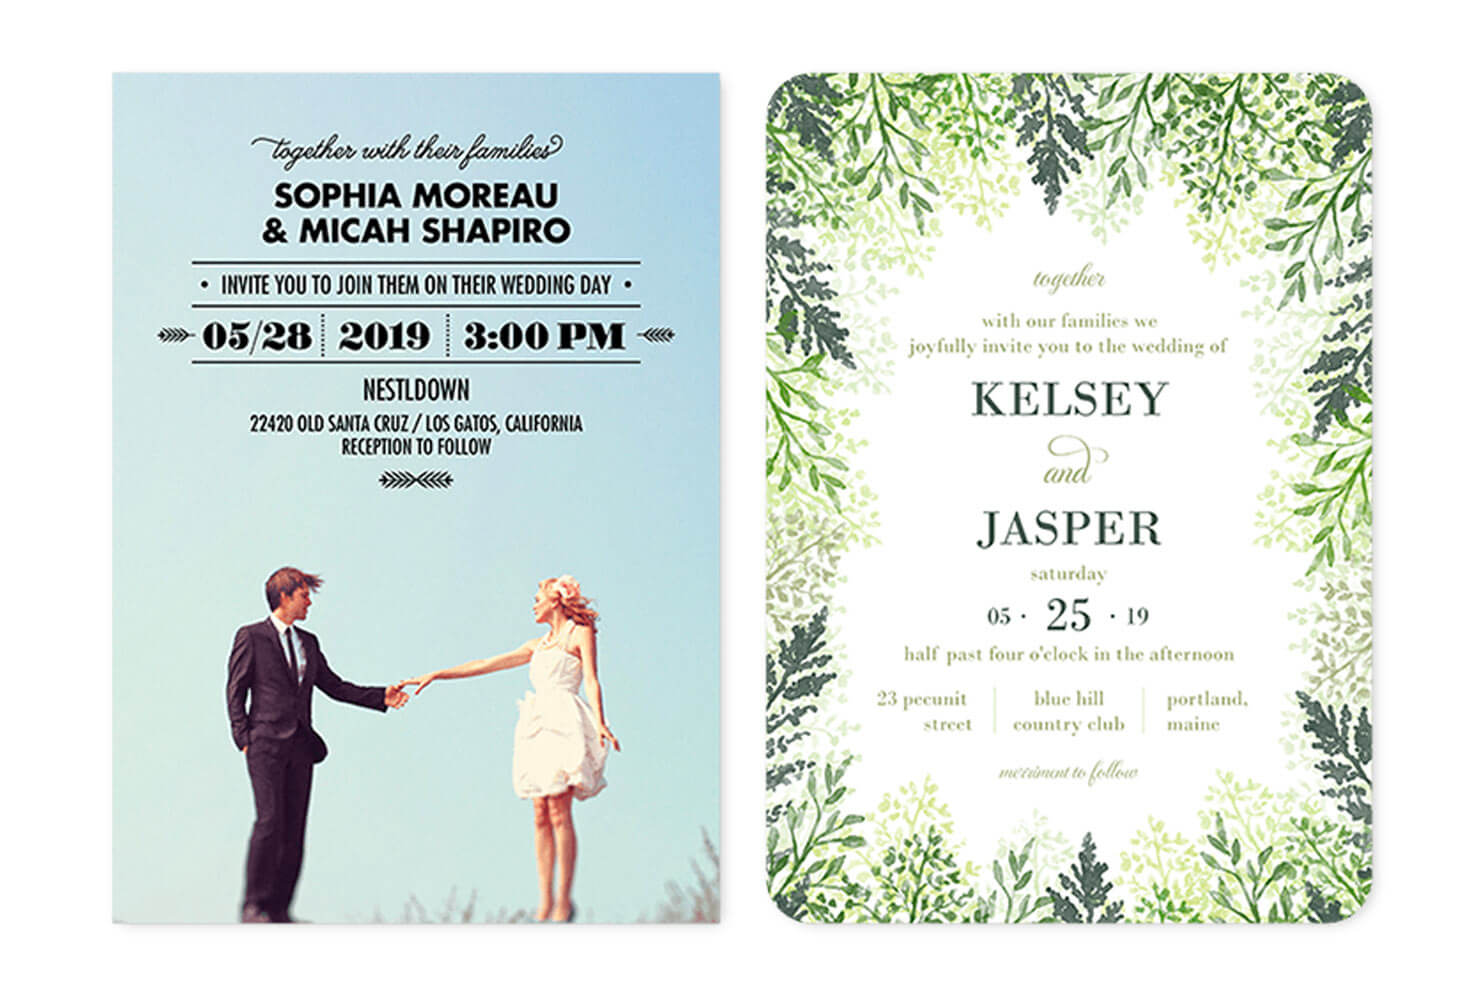 35+ Wedding Invitation Wording Examples 2020 | Shutterfly With Church Wedding Invitation Card Template